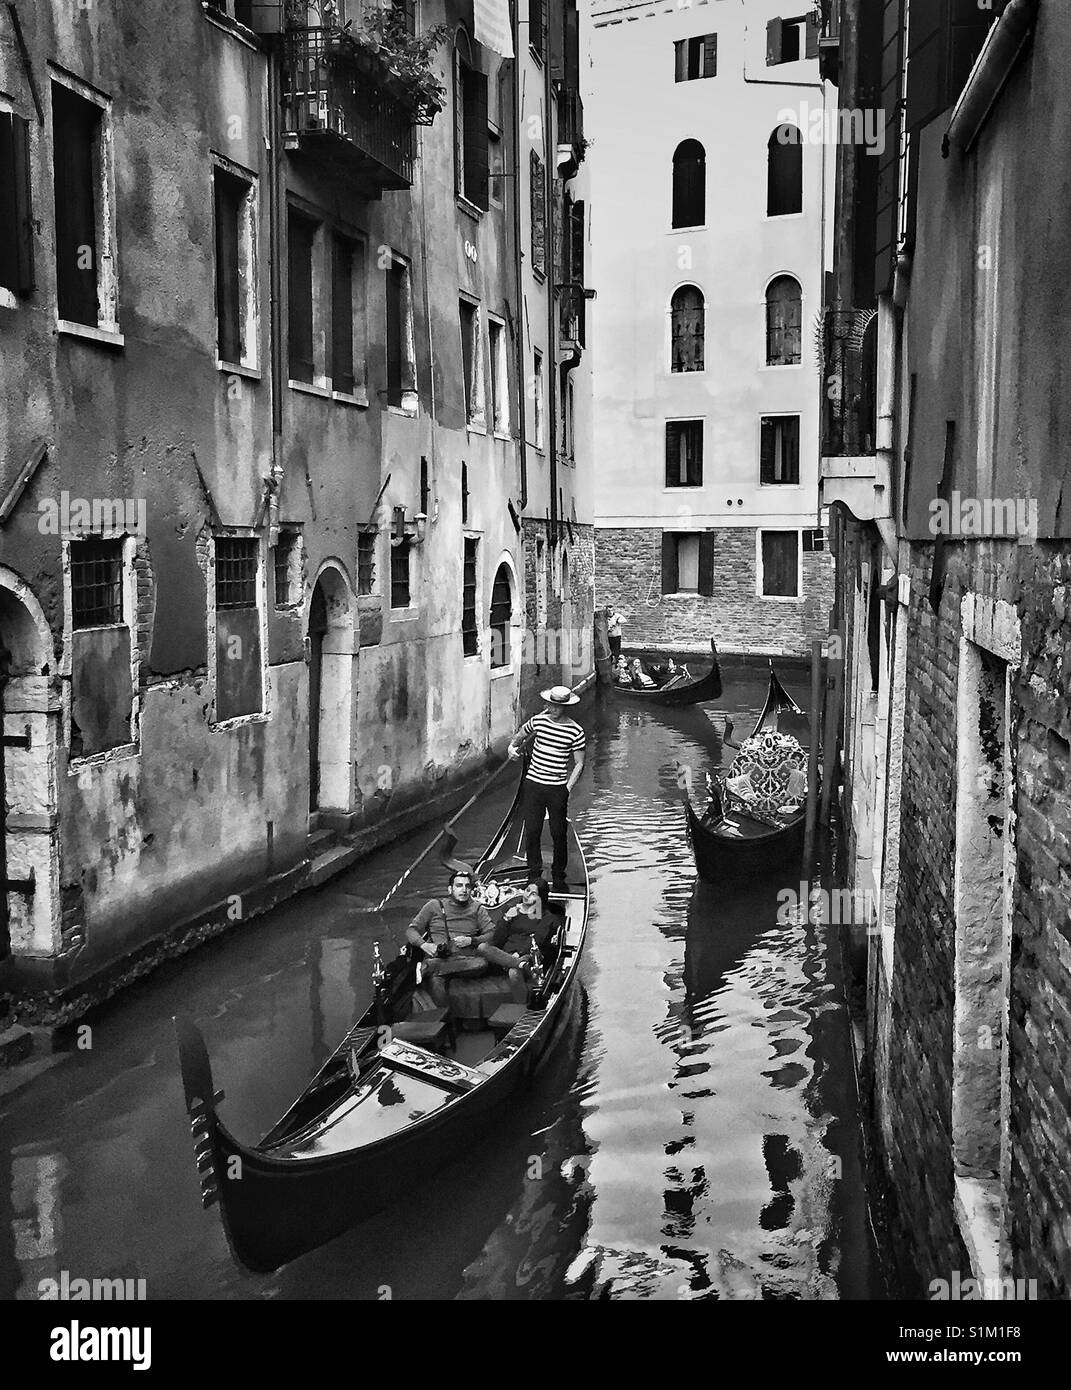 Black and white of gondola on a canal in Venice. Stock Photo